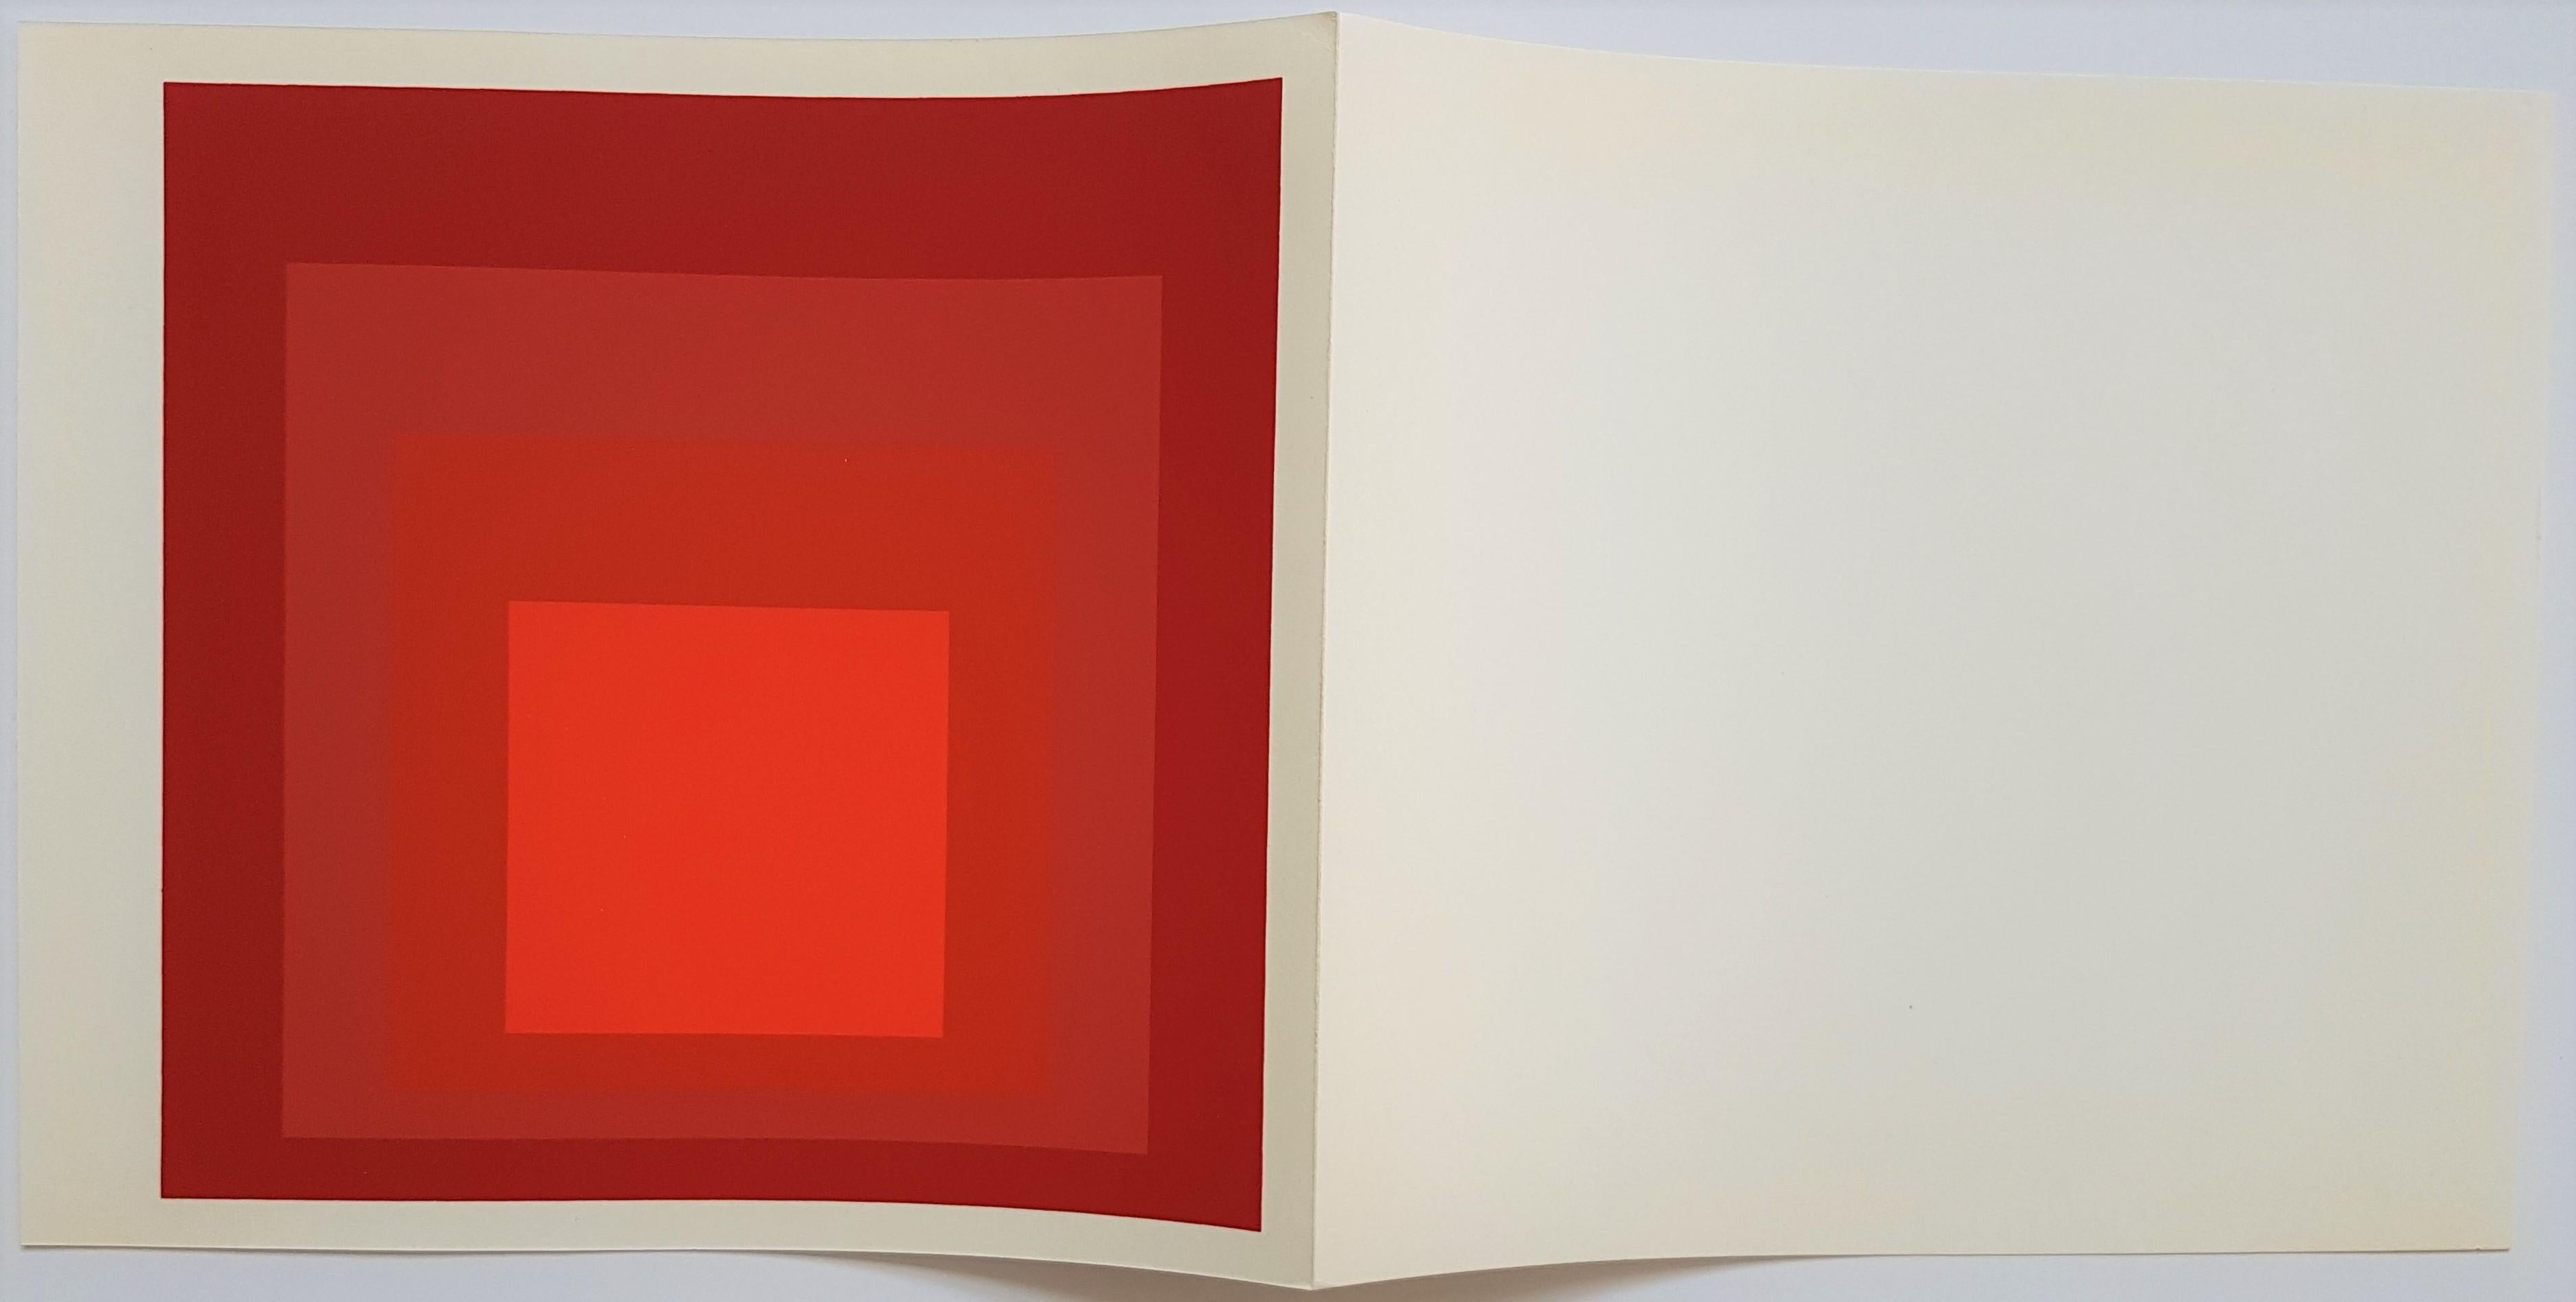 Homage to the Square: R-III A-4 (~28% OFF LIST PRICE - LIMITED TIME ONLY) - Abstract Print by (after) Josef Albers